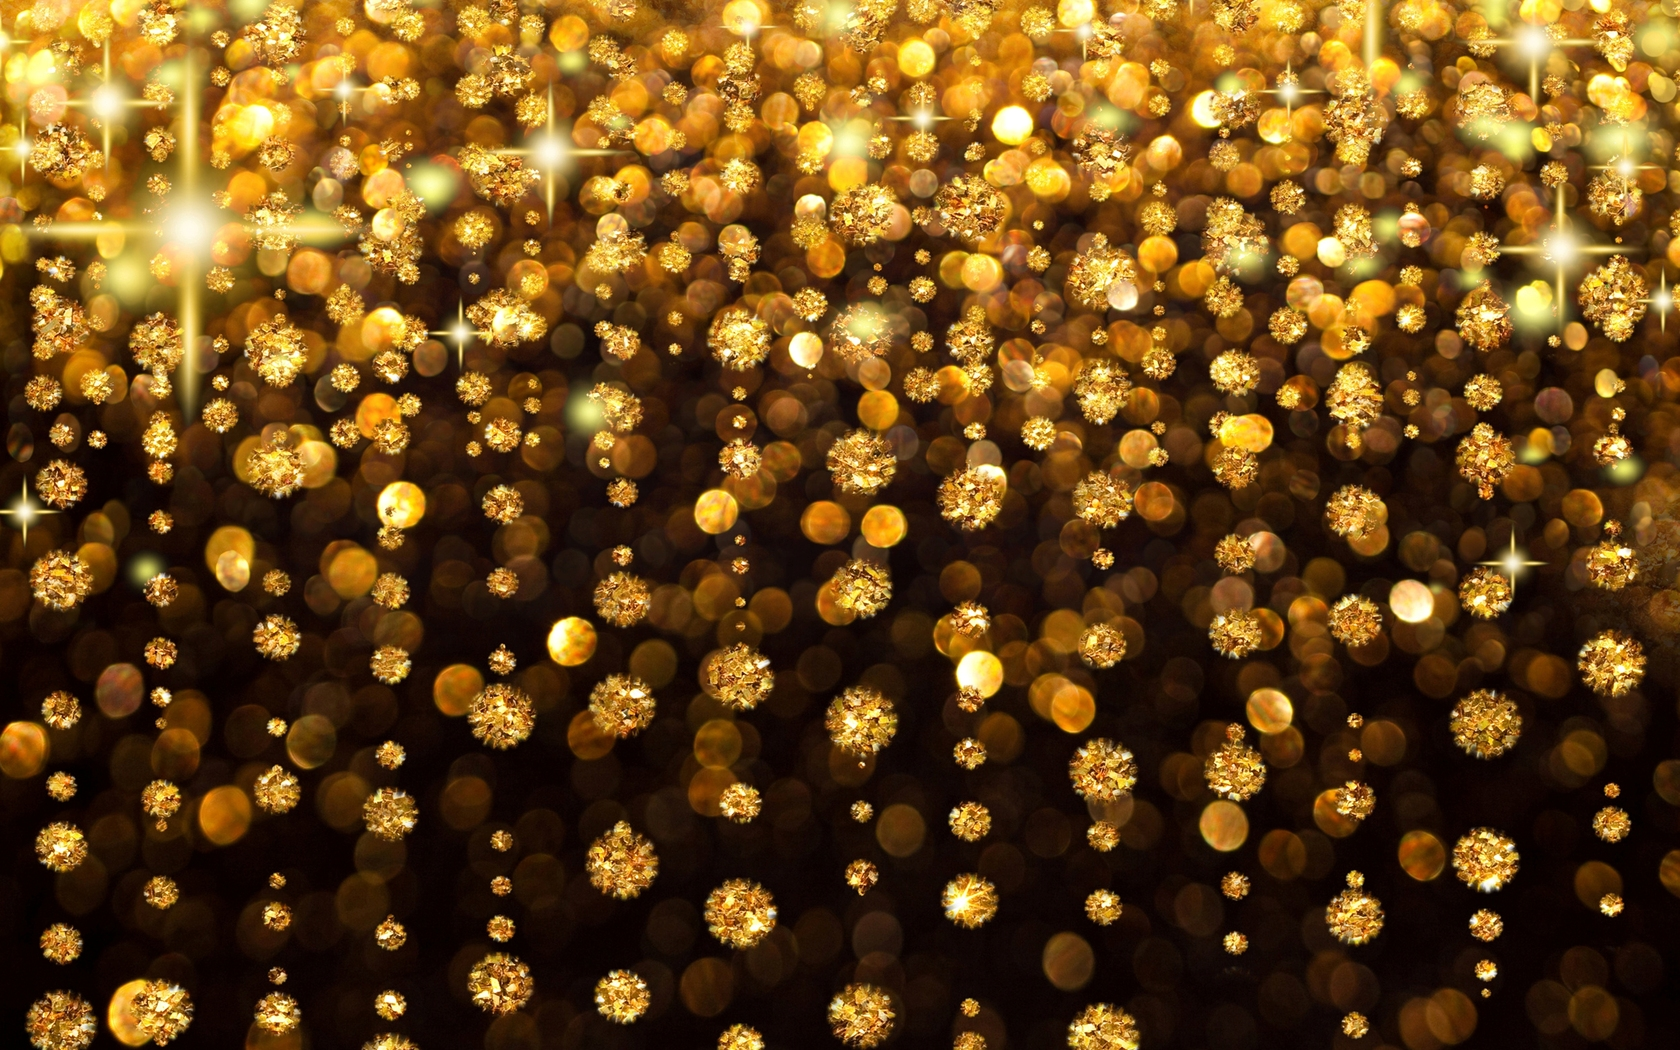 Brighten up any space with this sparkly yellow glitter background